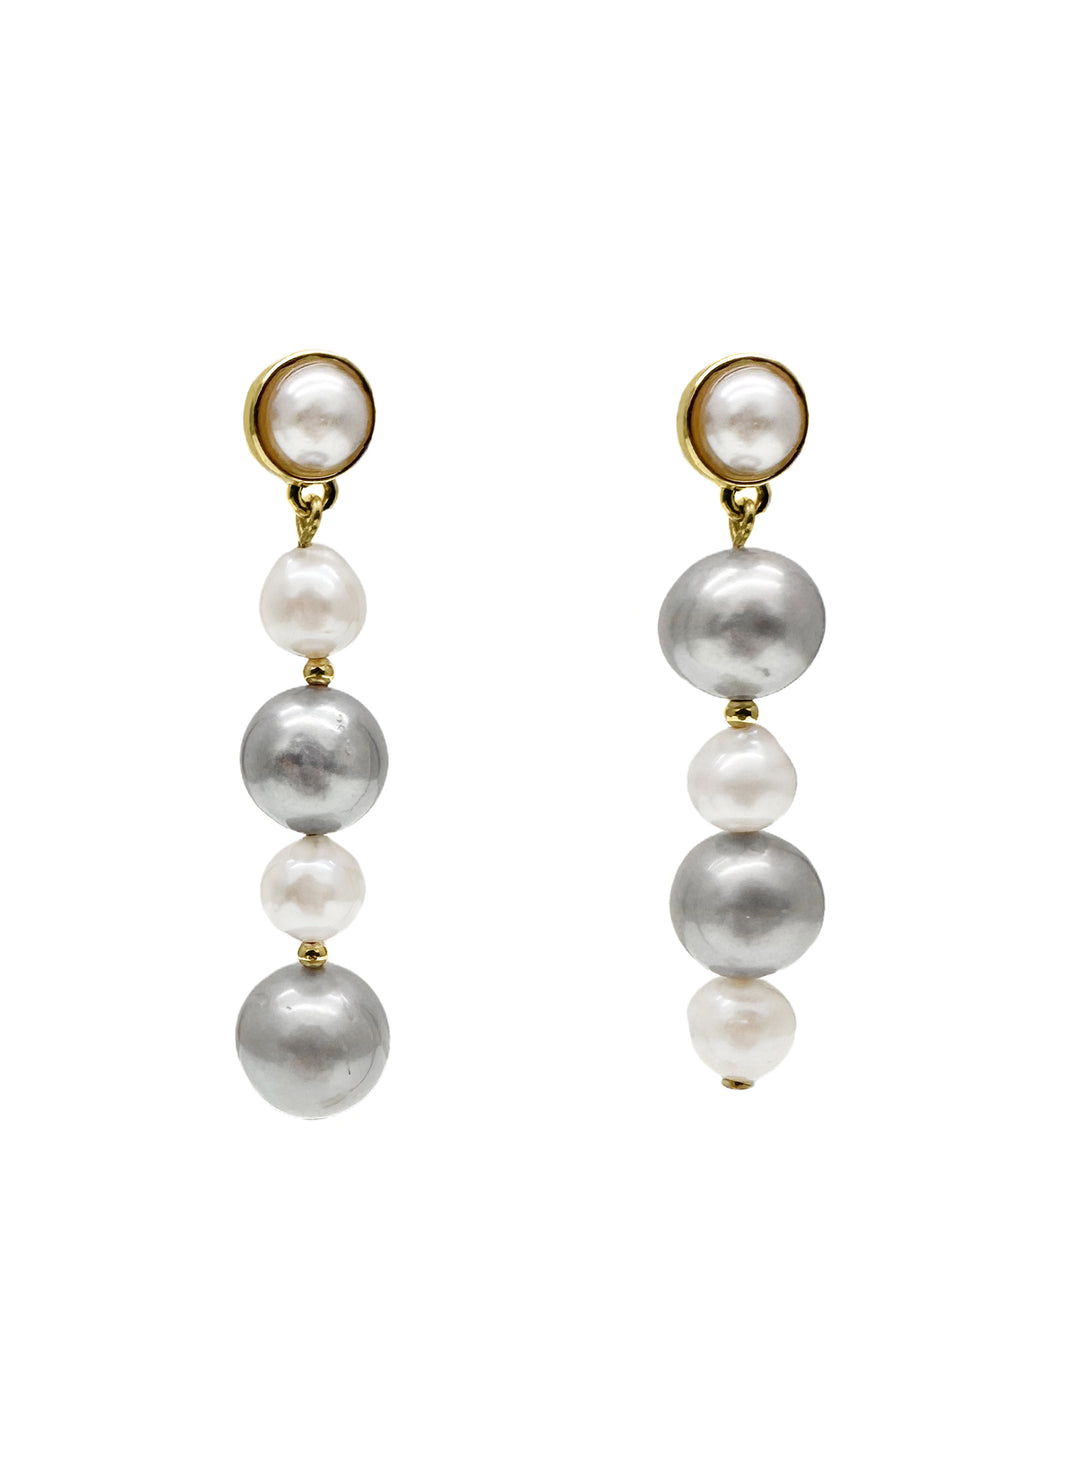 Classic White and Gray Natural Freshwater Pearls Stud Earrings LE046 - FARRA